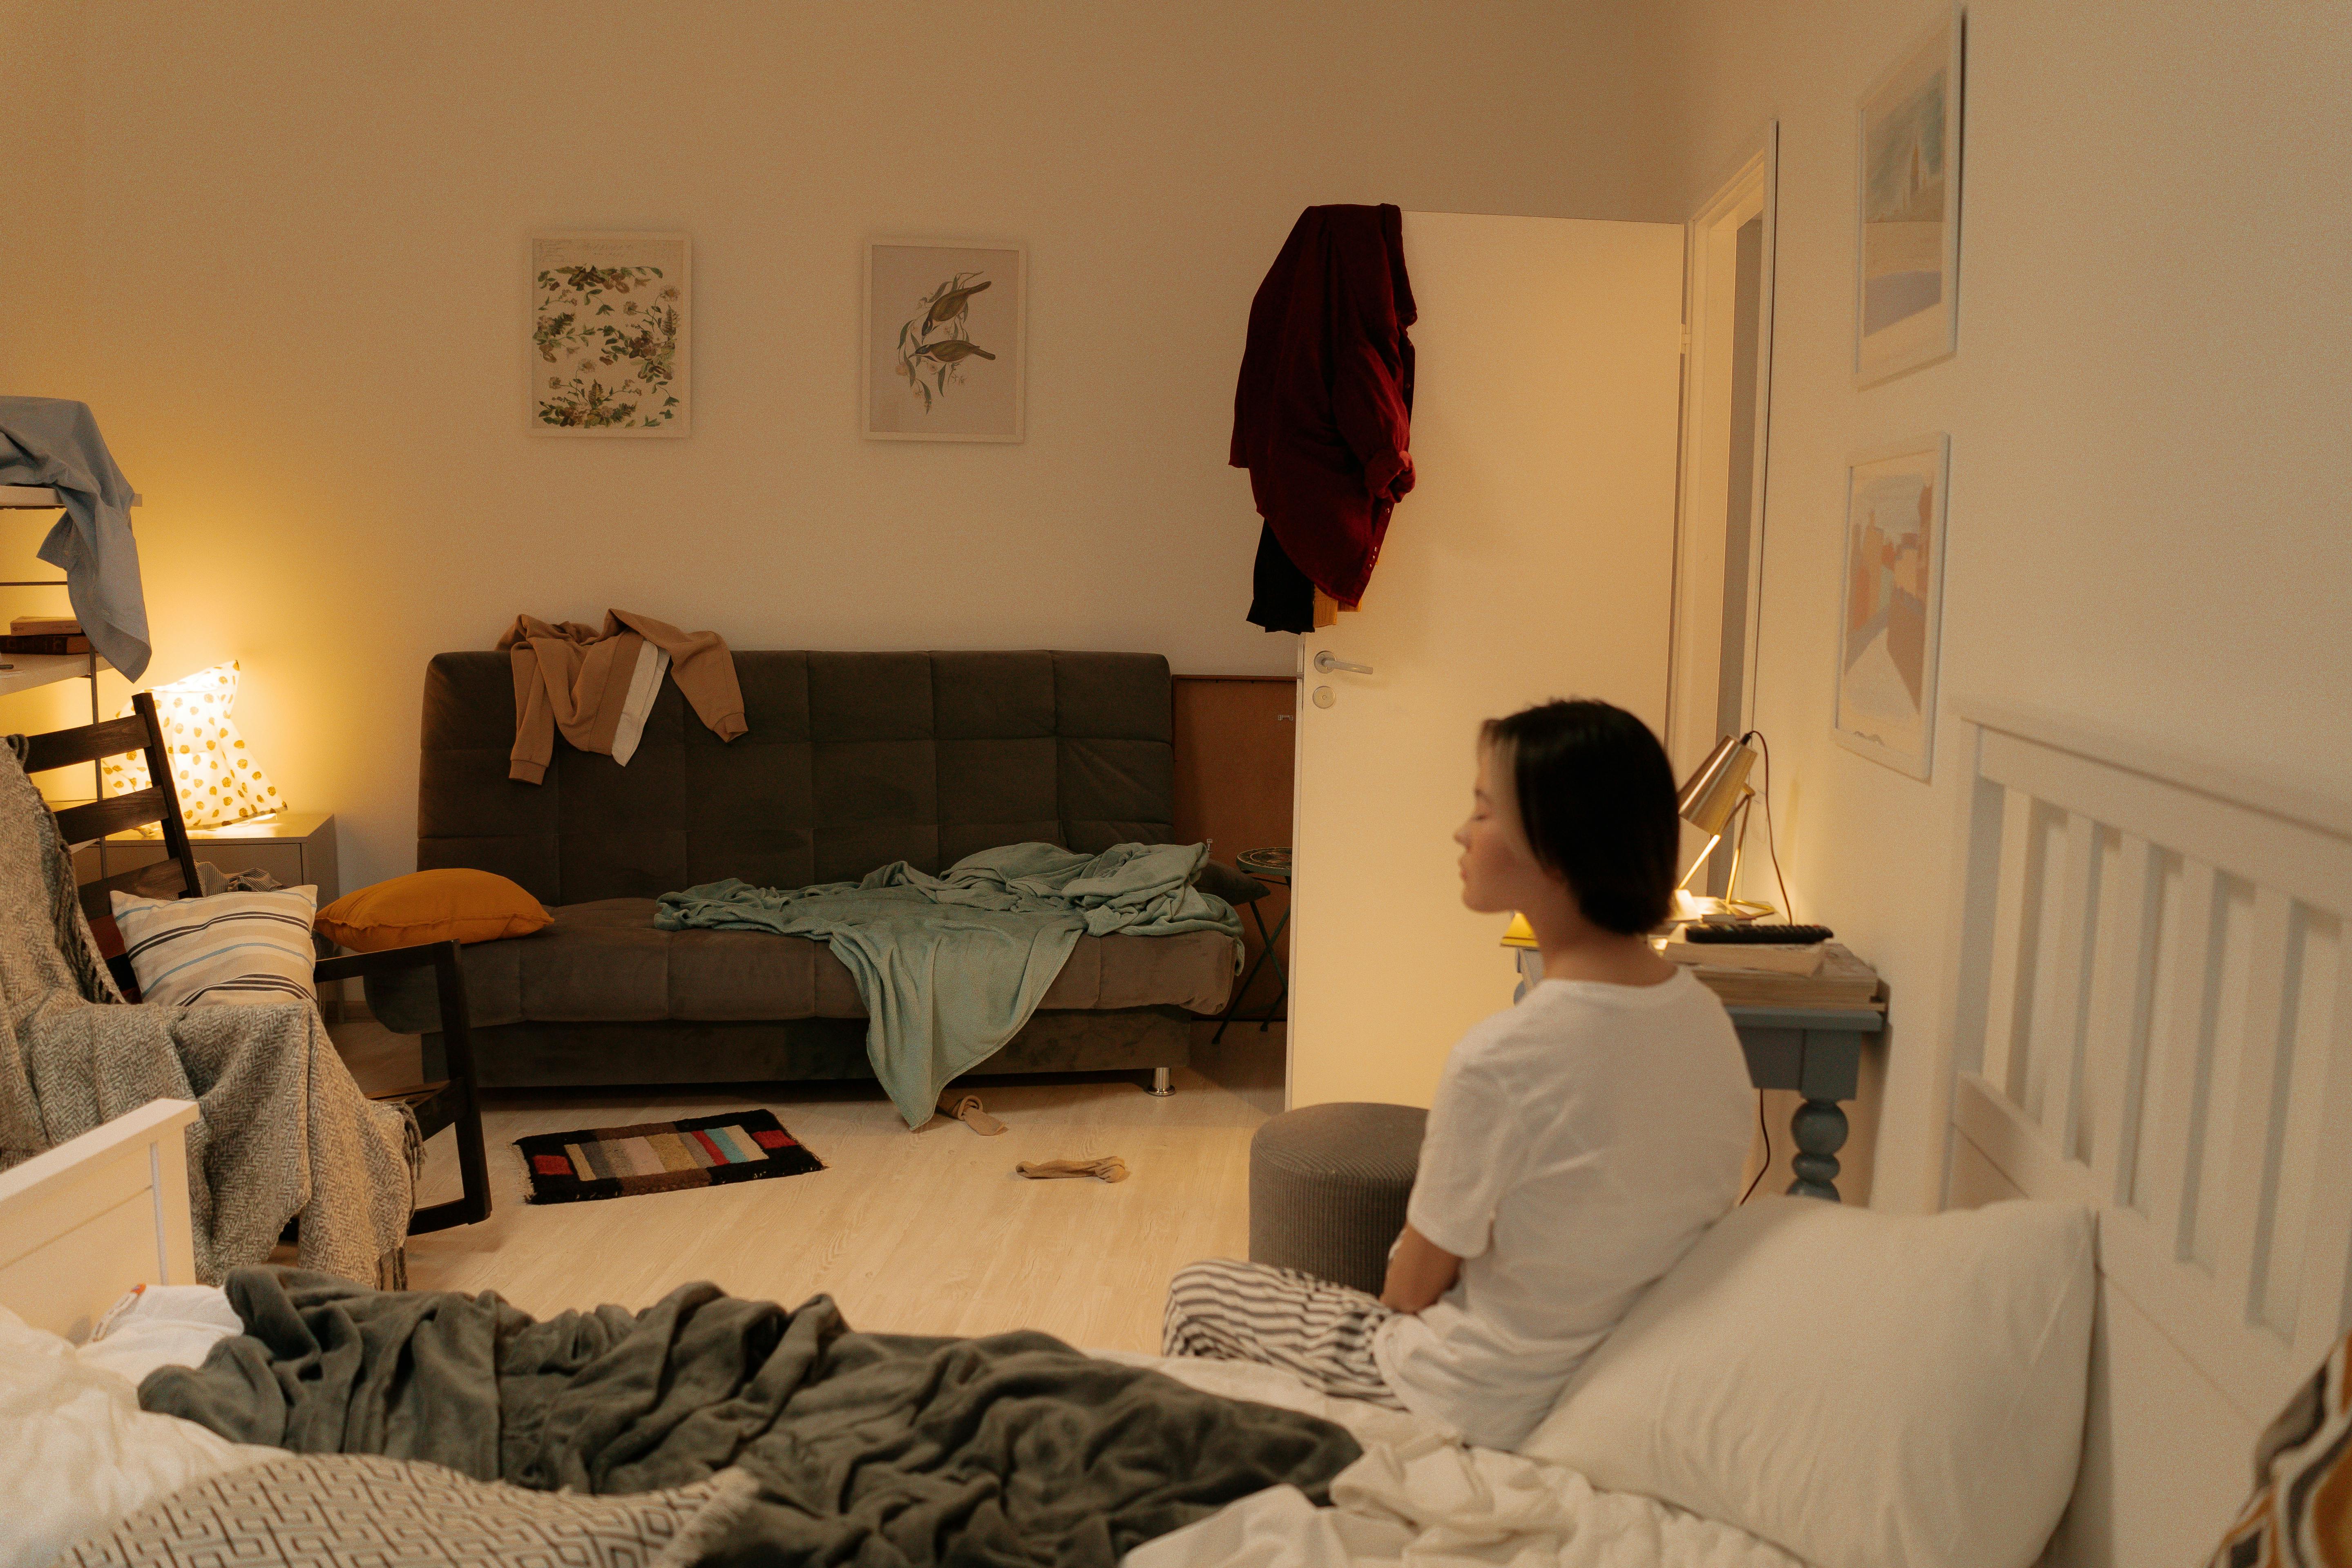 An overwhelmed and upset woman looking at a messy room | Source: Pexels